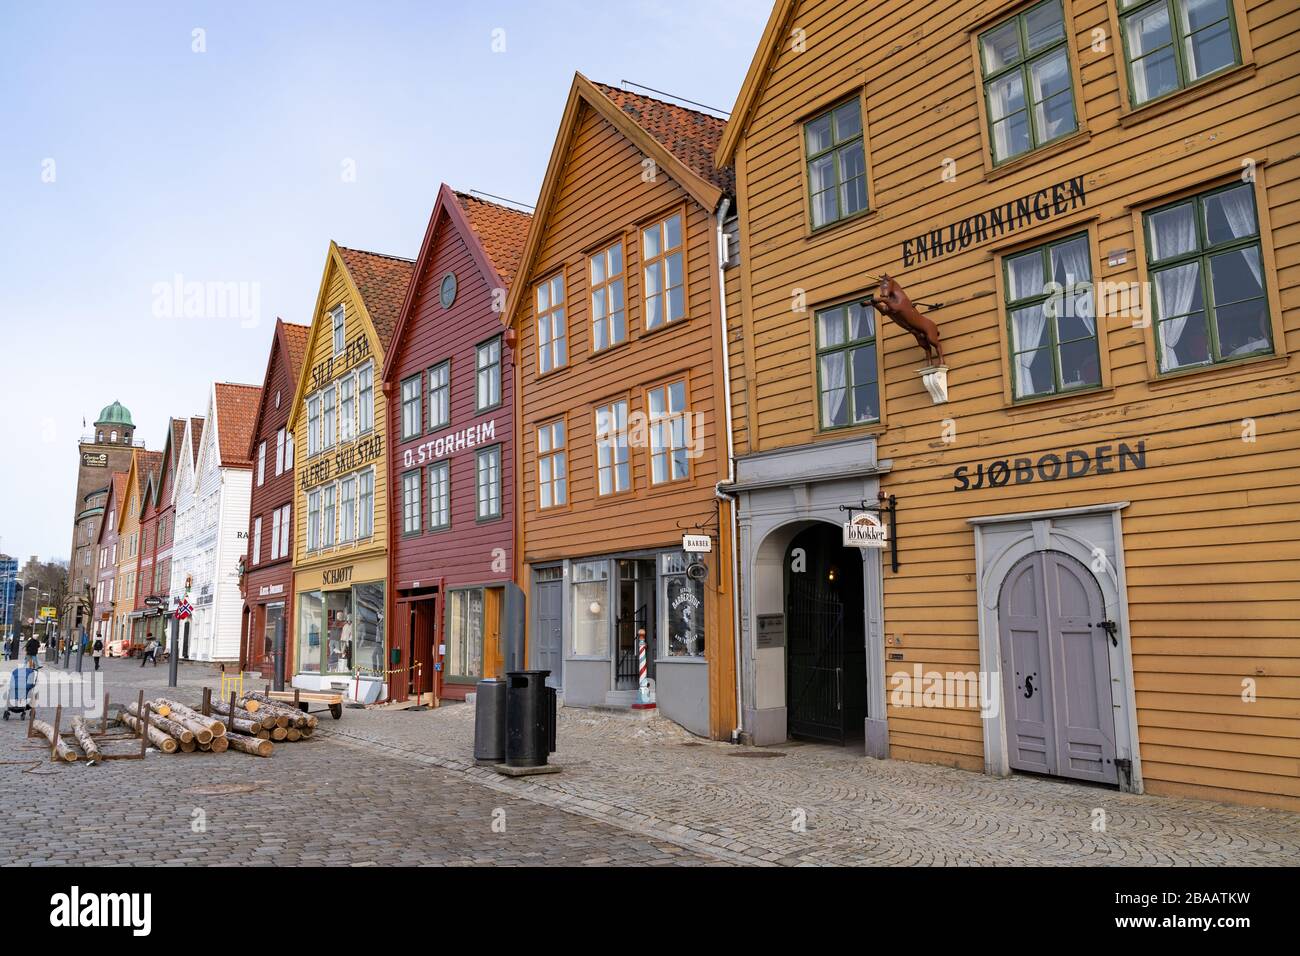 Bergen, Norway. Facades of buildings in Bryggen - Hanseatic wharf. Historic  buildings are a UNESCO World Heritage Site. Stock Photo